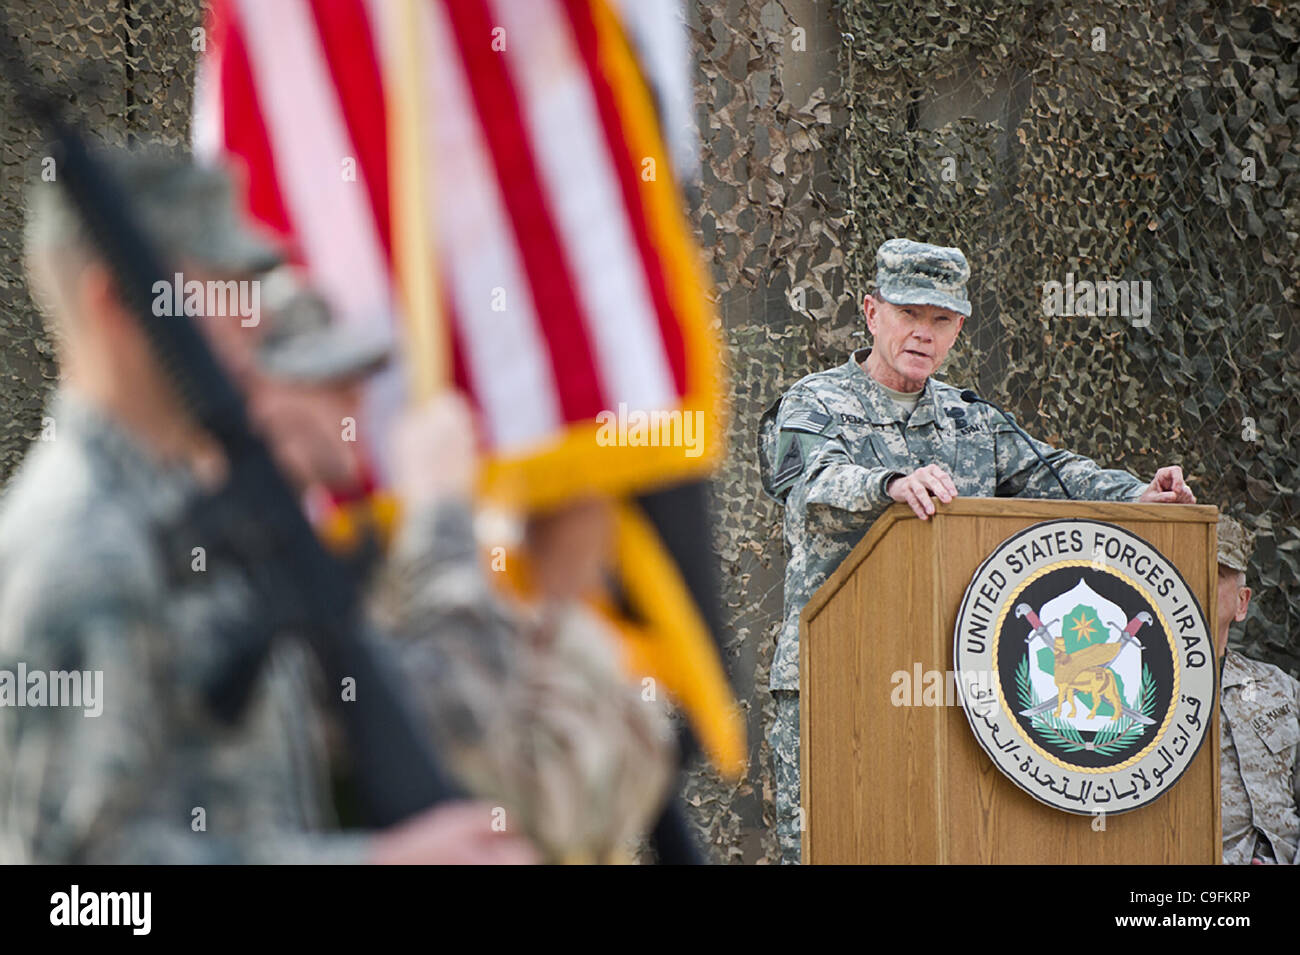 US Chairman of the Joint Chiefs of Staff Army General Martin E. Dempsey speaks to US military forces during the end of mission ceremony December 15,, 2011 in Baghdad, Iraq. The ceremony officially ends the Iraq war after more than eight years of combat. Stock Photo